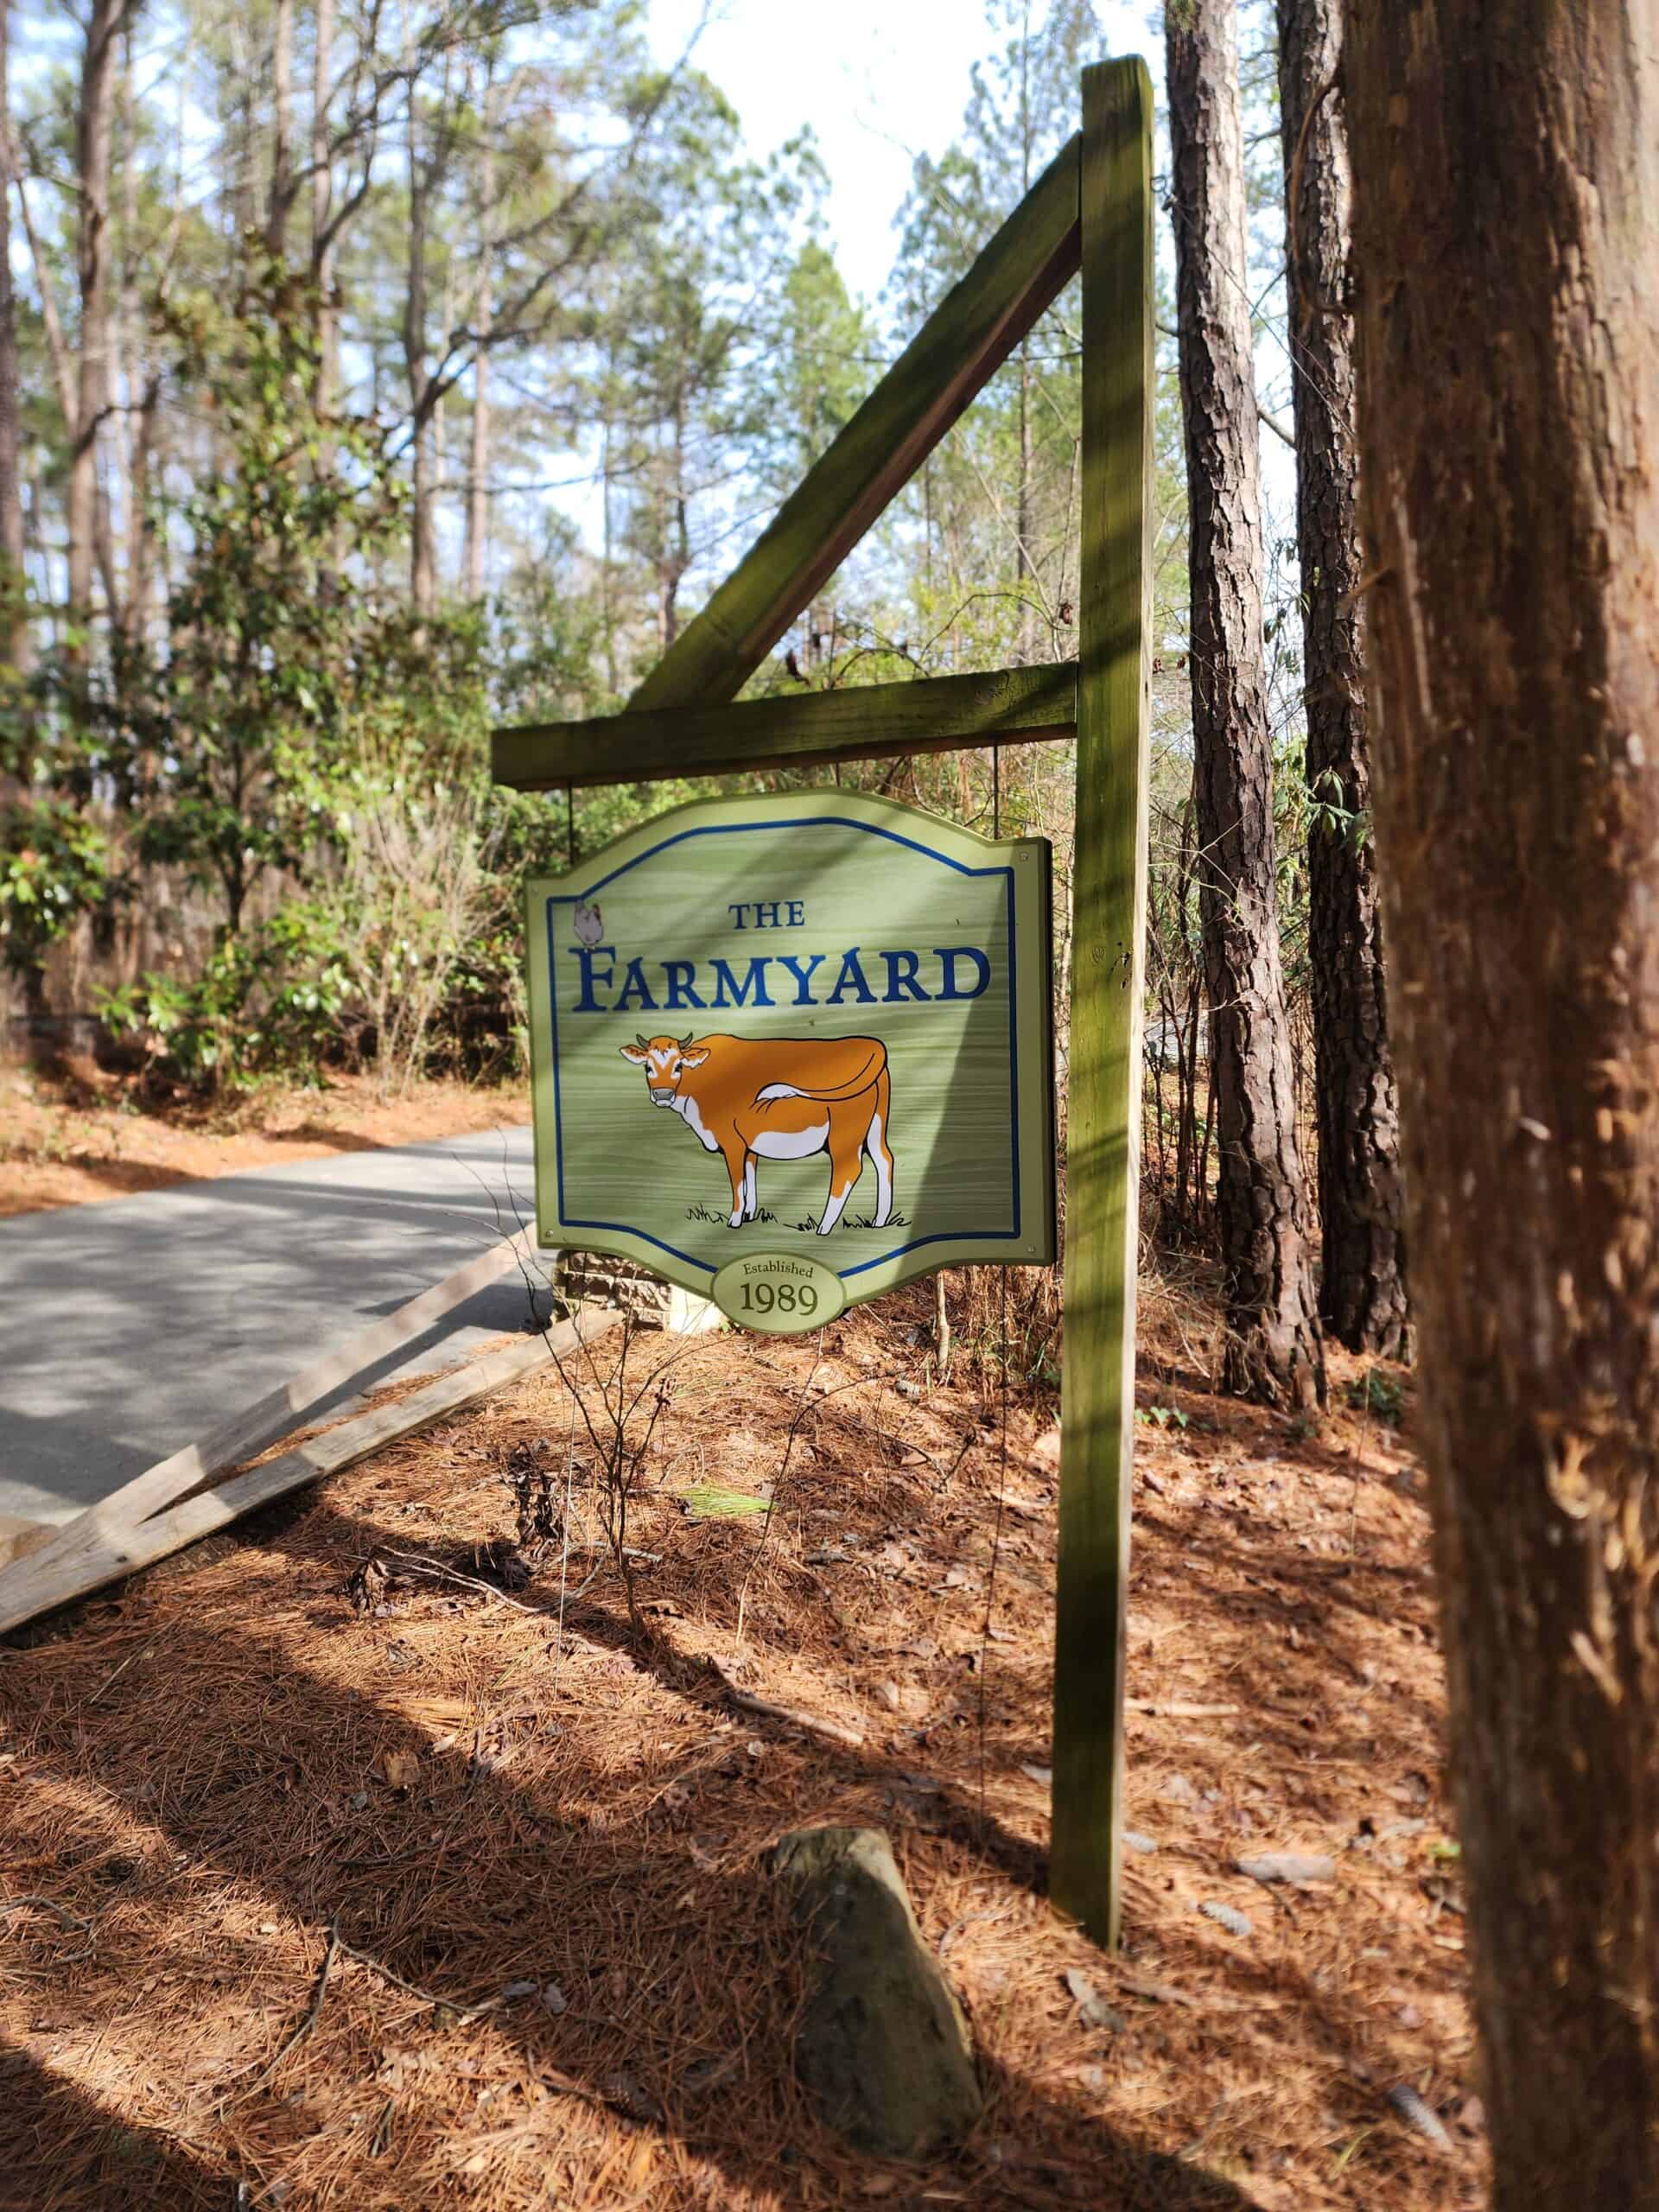 Signpost for 'The Farmyard' set amidst a backdrop of tall pines and a carpet of pine needles, marking a pastoral exhibit established in 1989, suggesting an educational farm experience within a natural forest setting